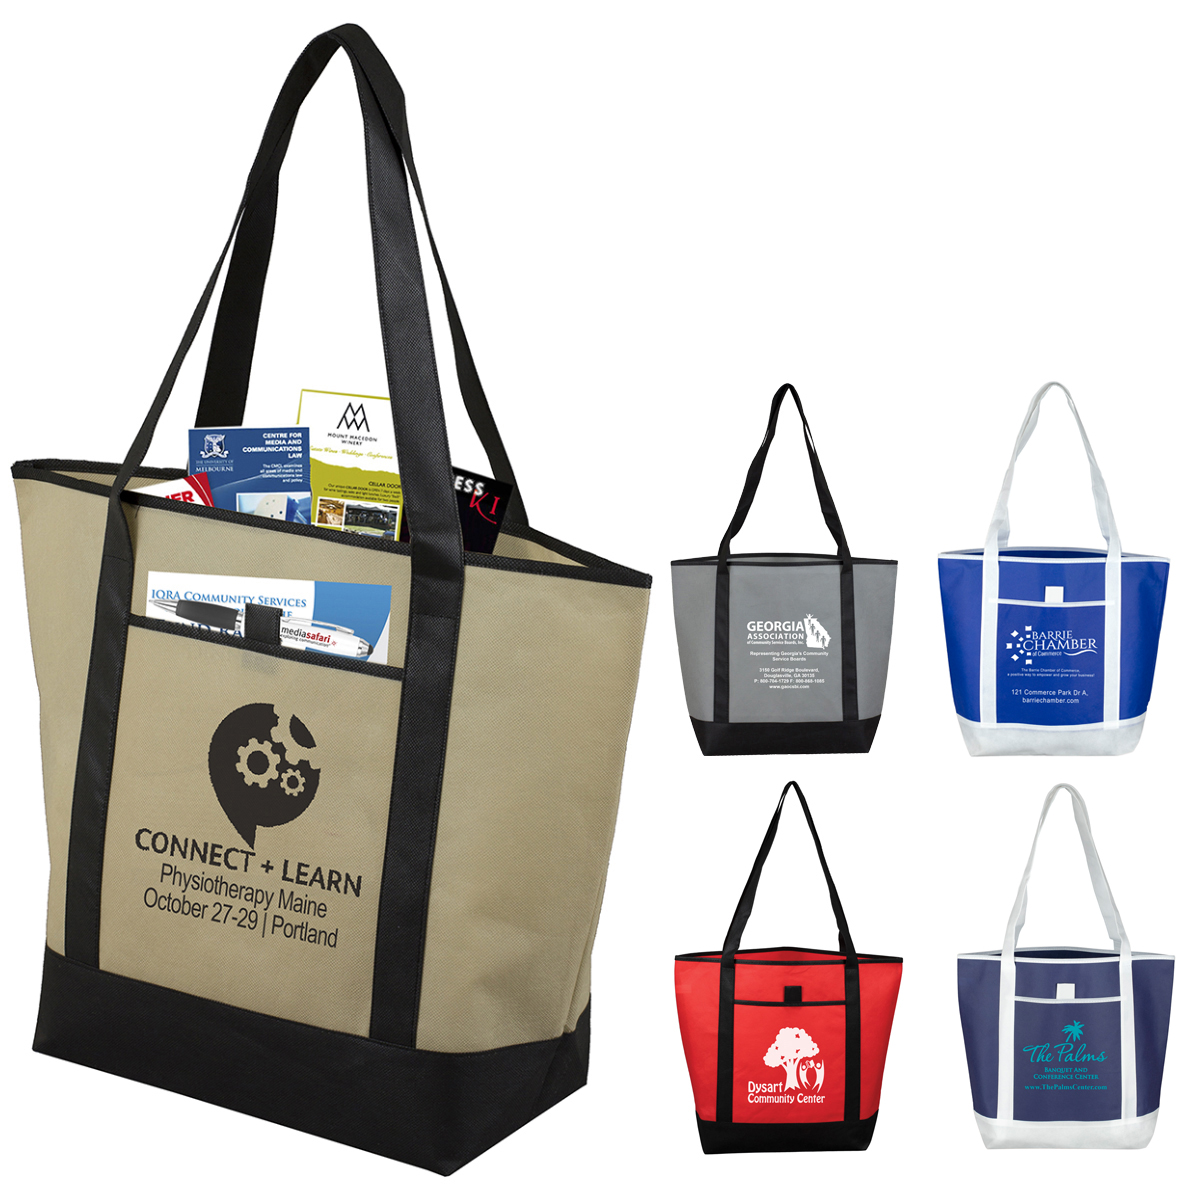 17-1/2" W x 13-1/2" H x 6" D - "The CITY" Convention, Corporate, Travel, Beach and Boat Tote Bag